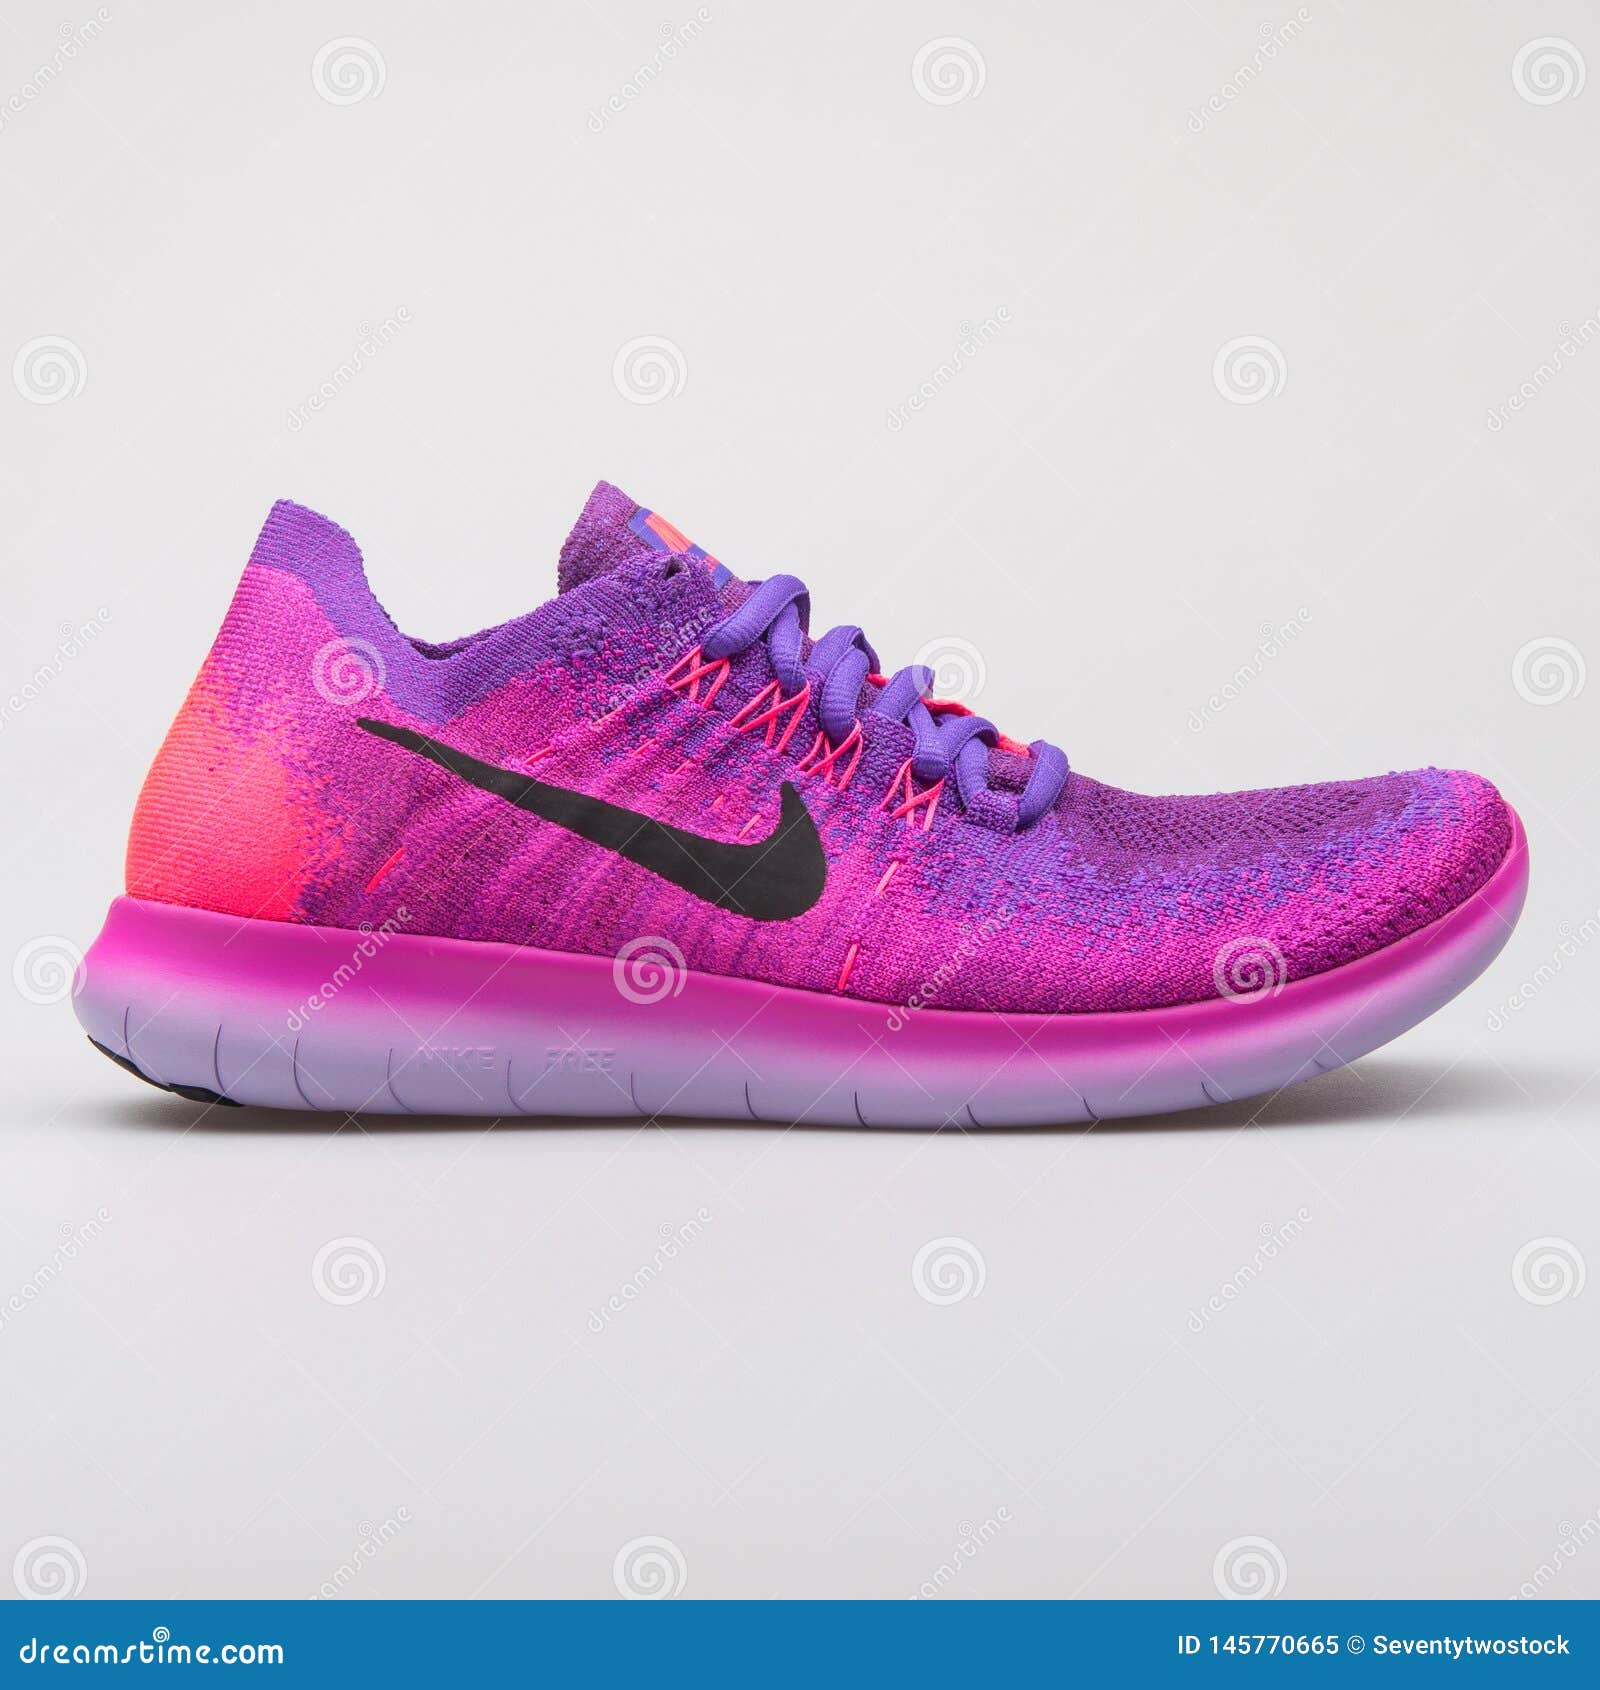 Familiar Luminancia curva Nike Free RN Flyknit 2017 Pink and Purple Sneaker Editorial Image - Image  of side, athletic: 145770665